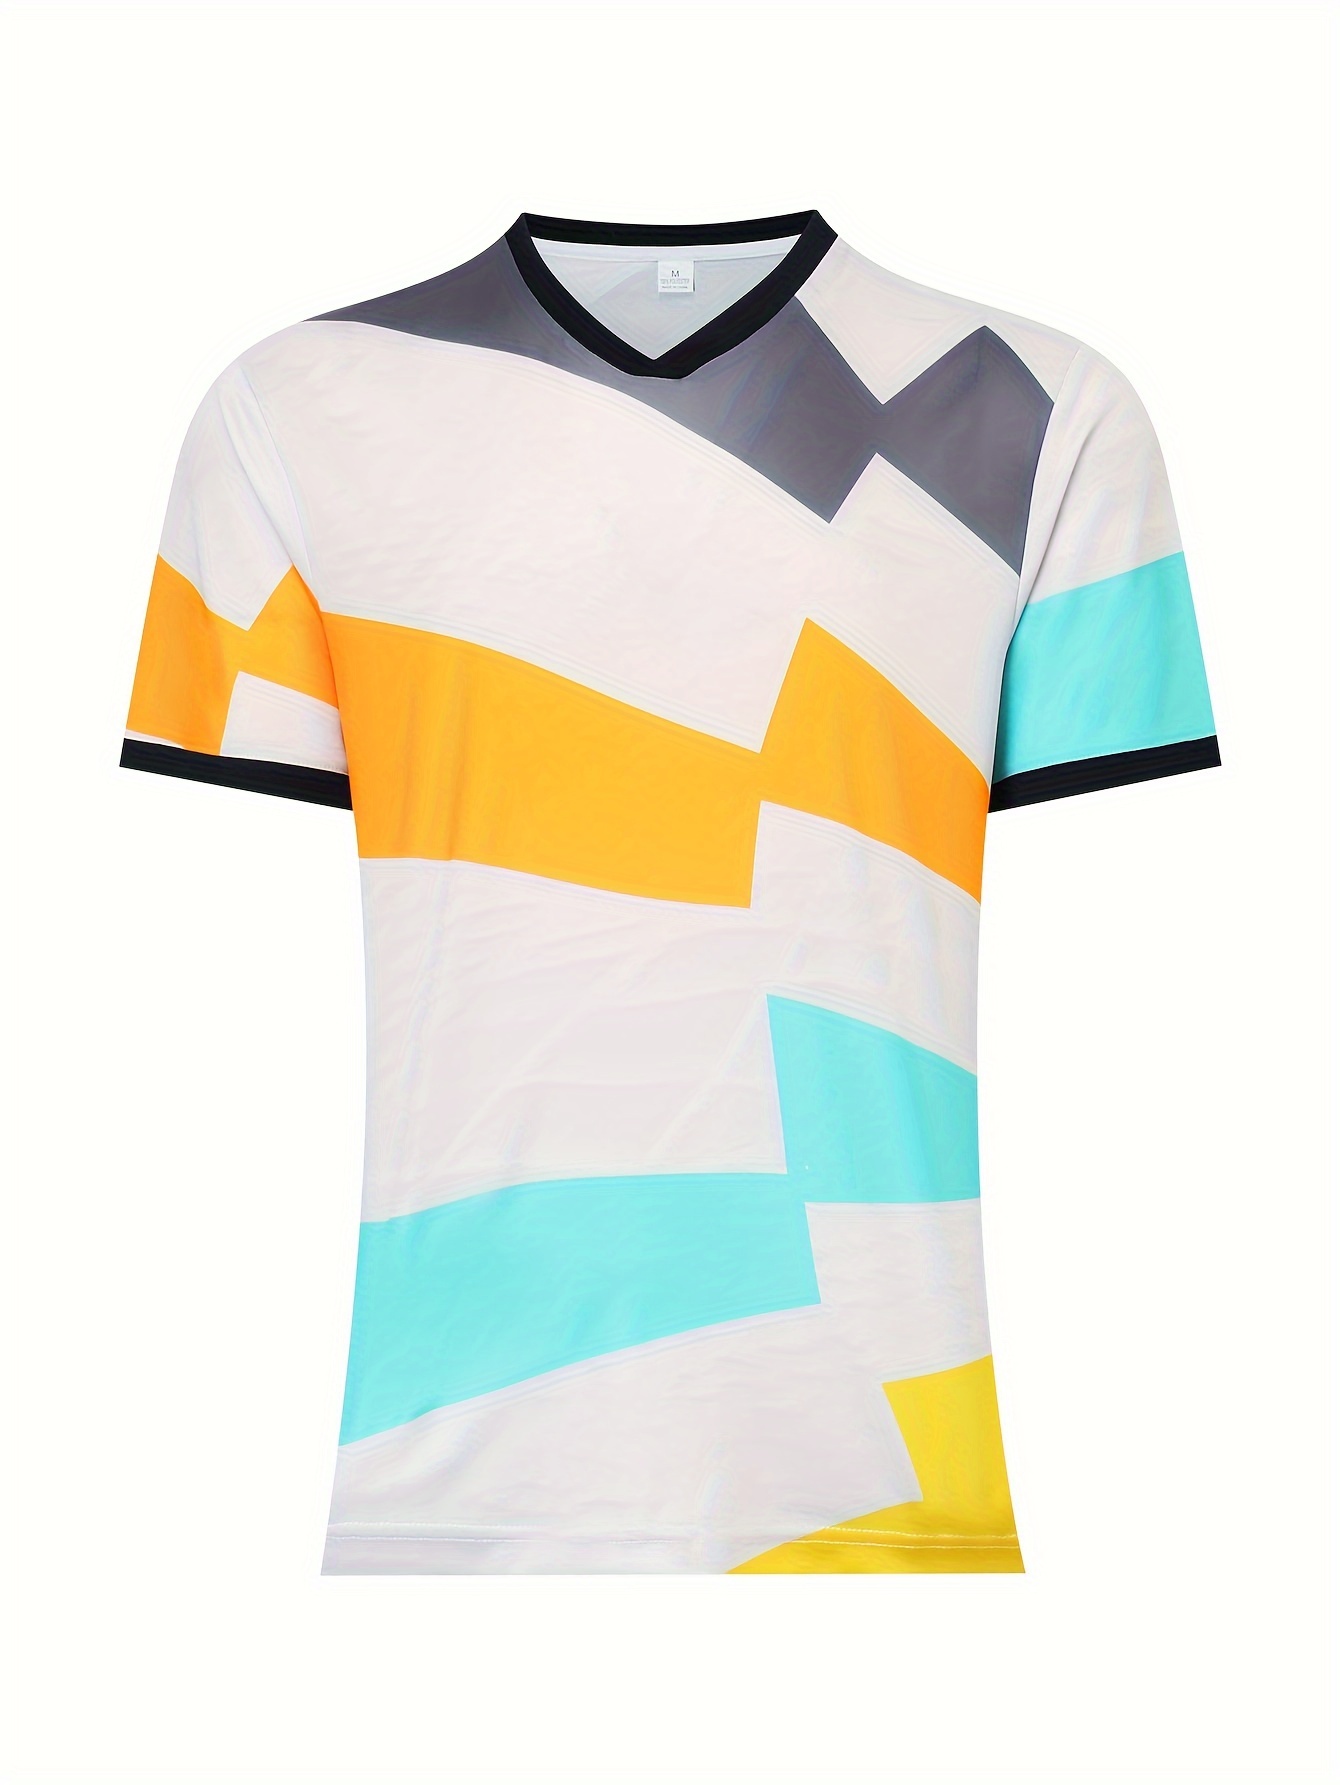 Men's Sports and Casual attire Terno T-shirts and shorts 3009